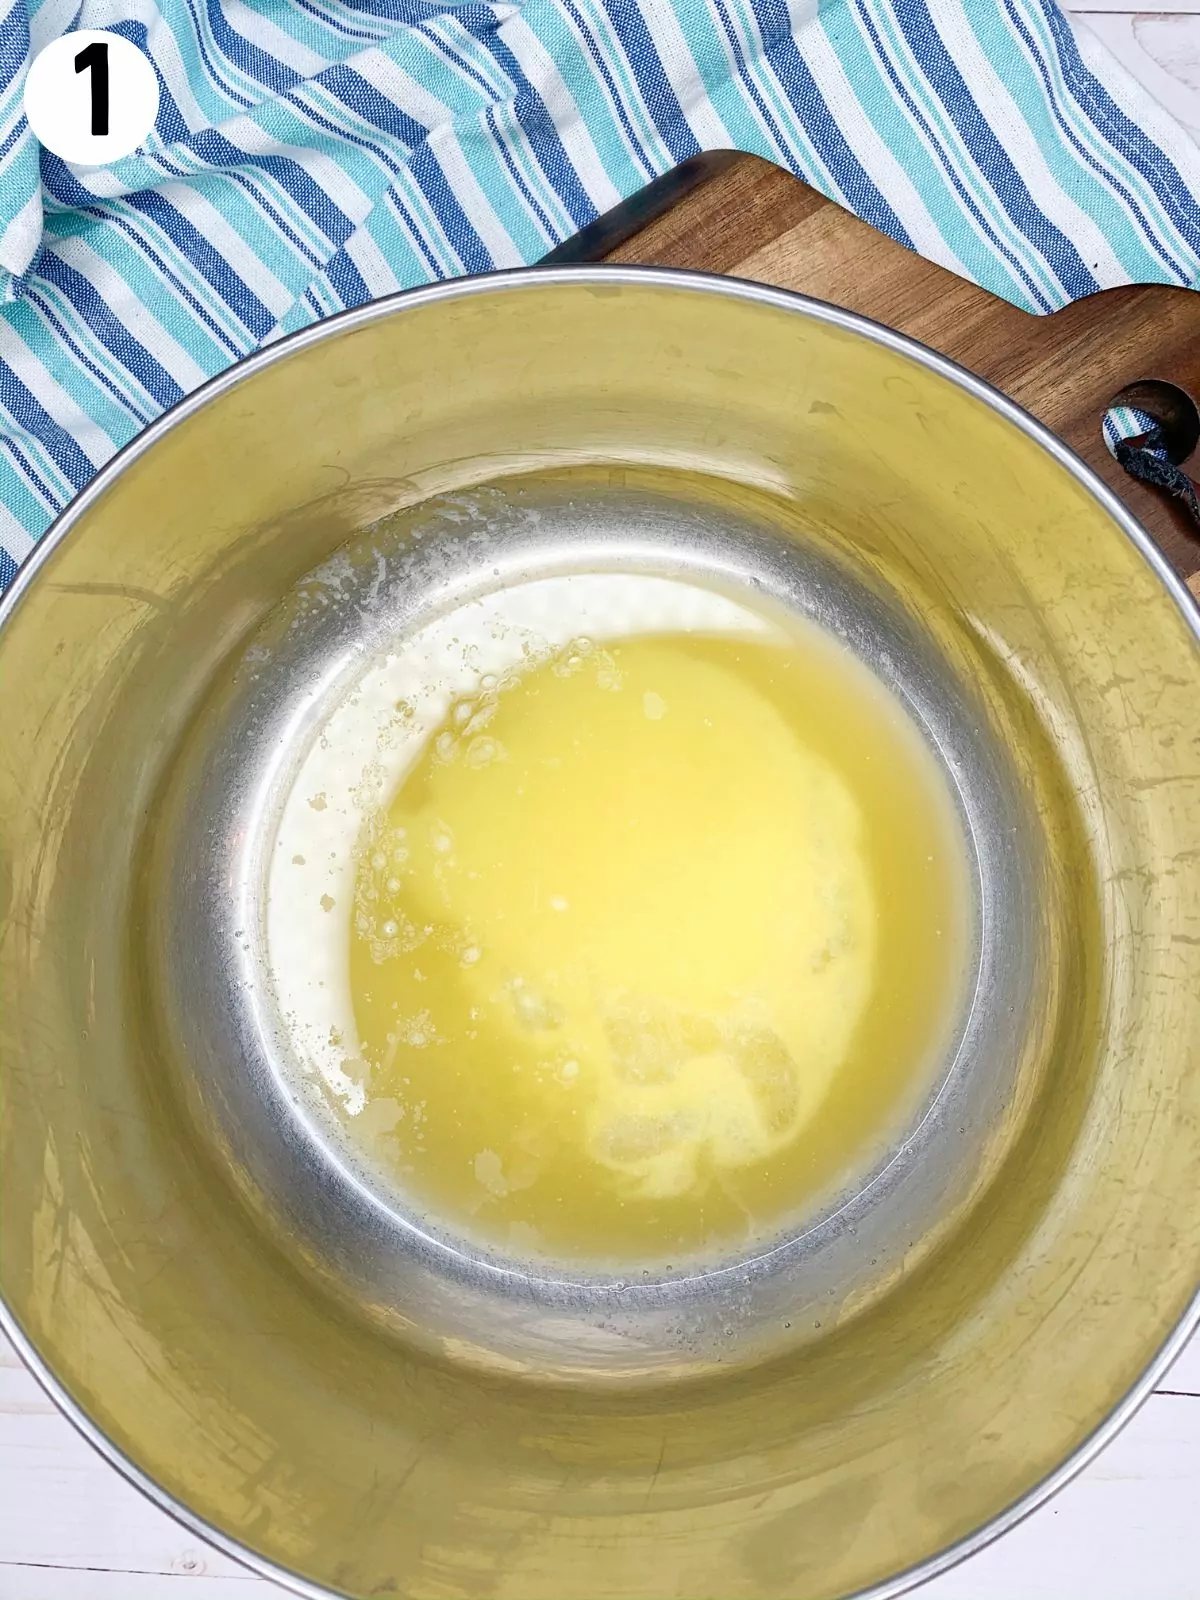 melted butter in bowl.